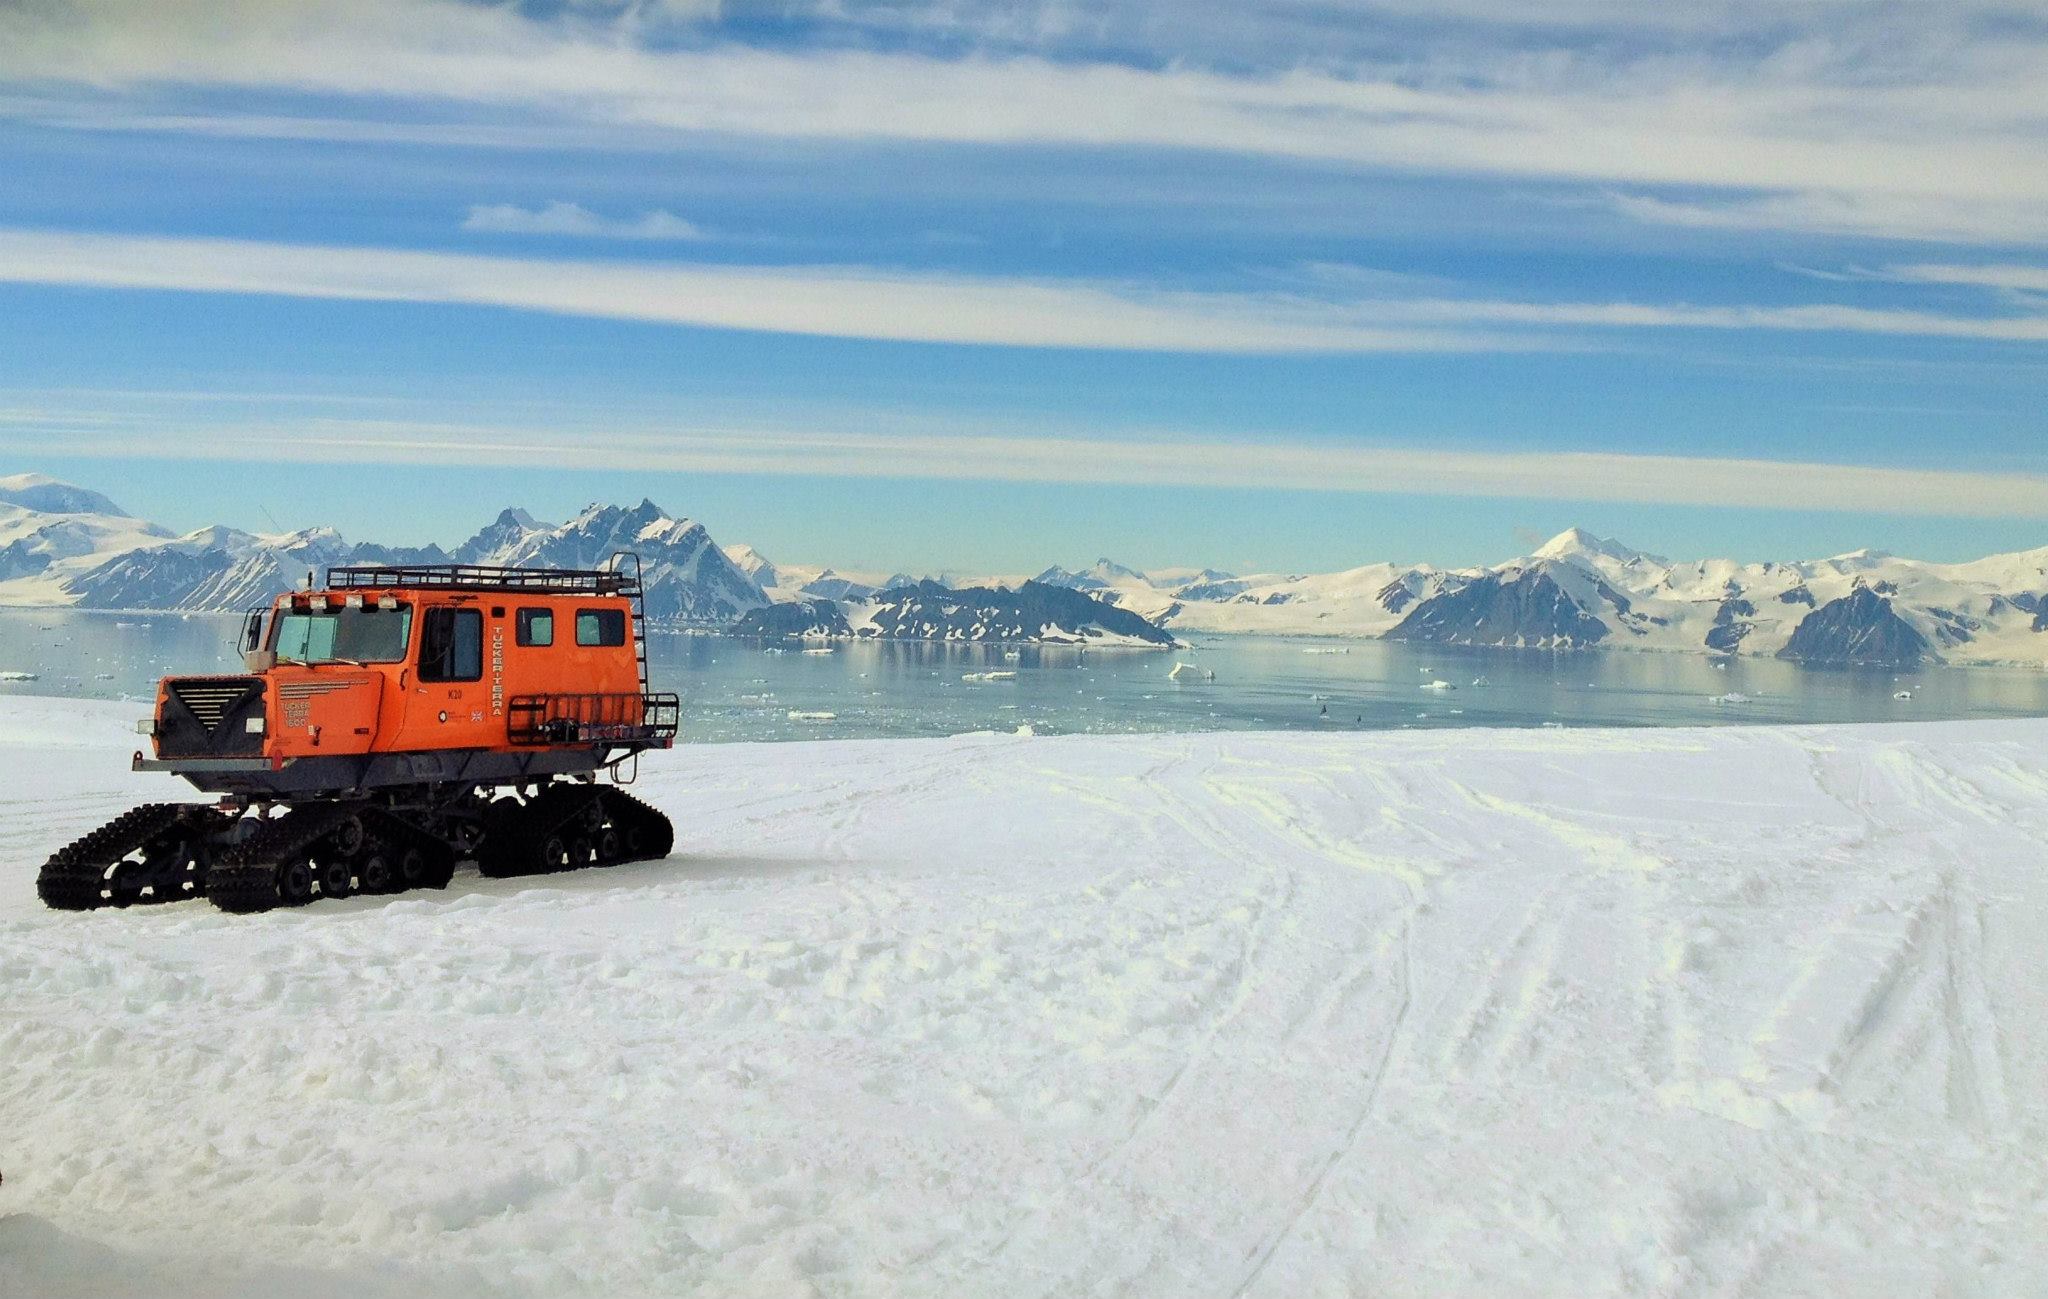 Antarctica’s bright white landscape. An orange snowmobile vehicle sits atop an icy white surface in the foreground. Wispy clouds line the sky above the mountainous and icy landscape.